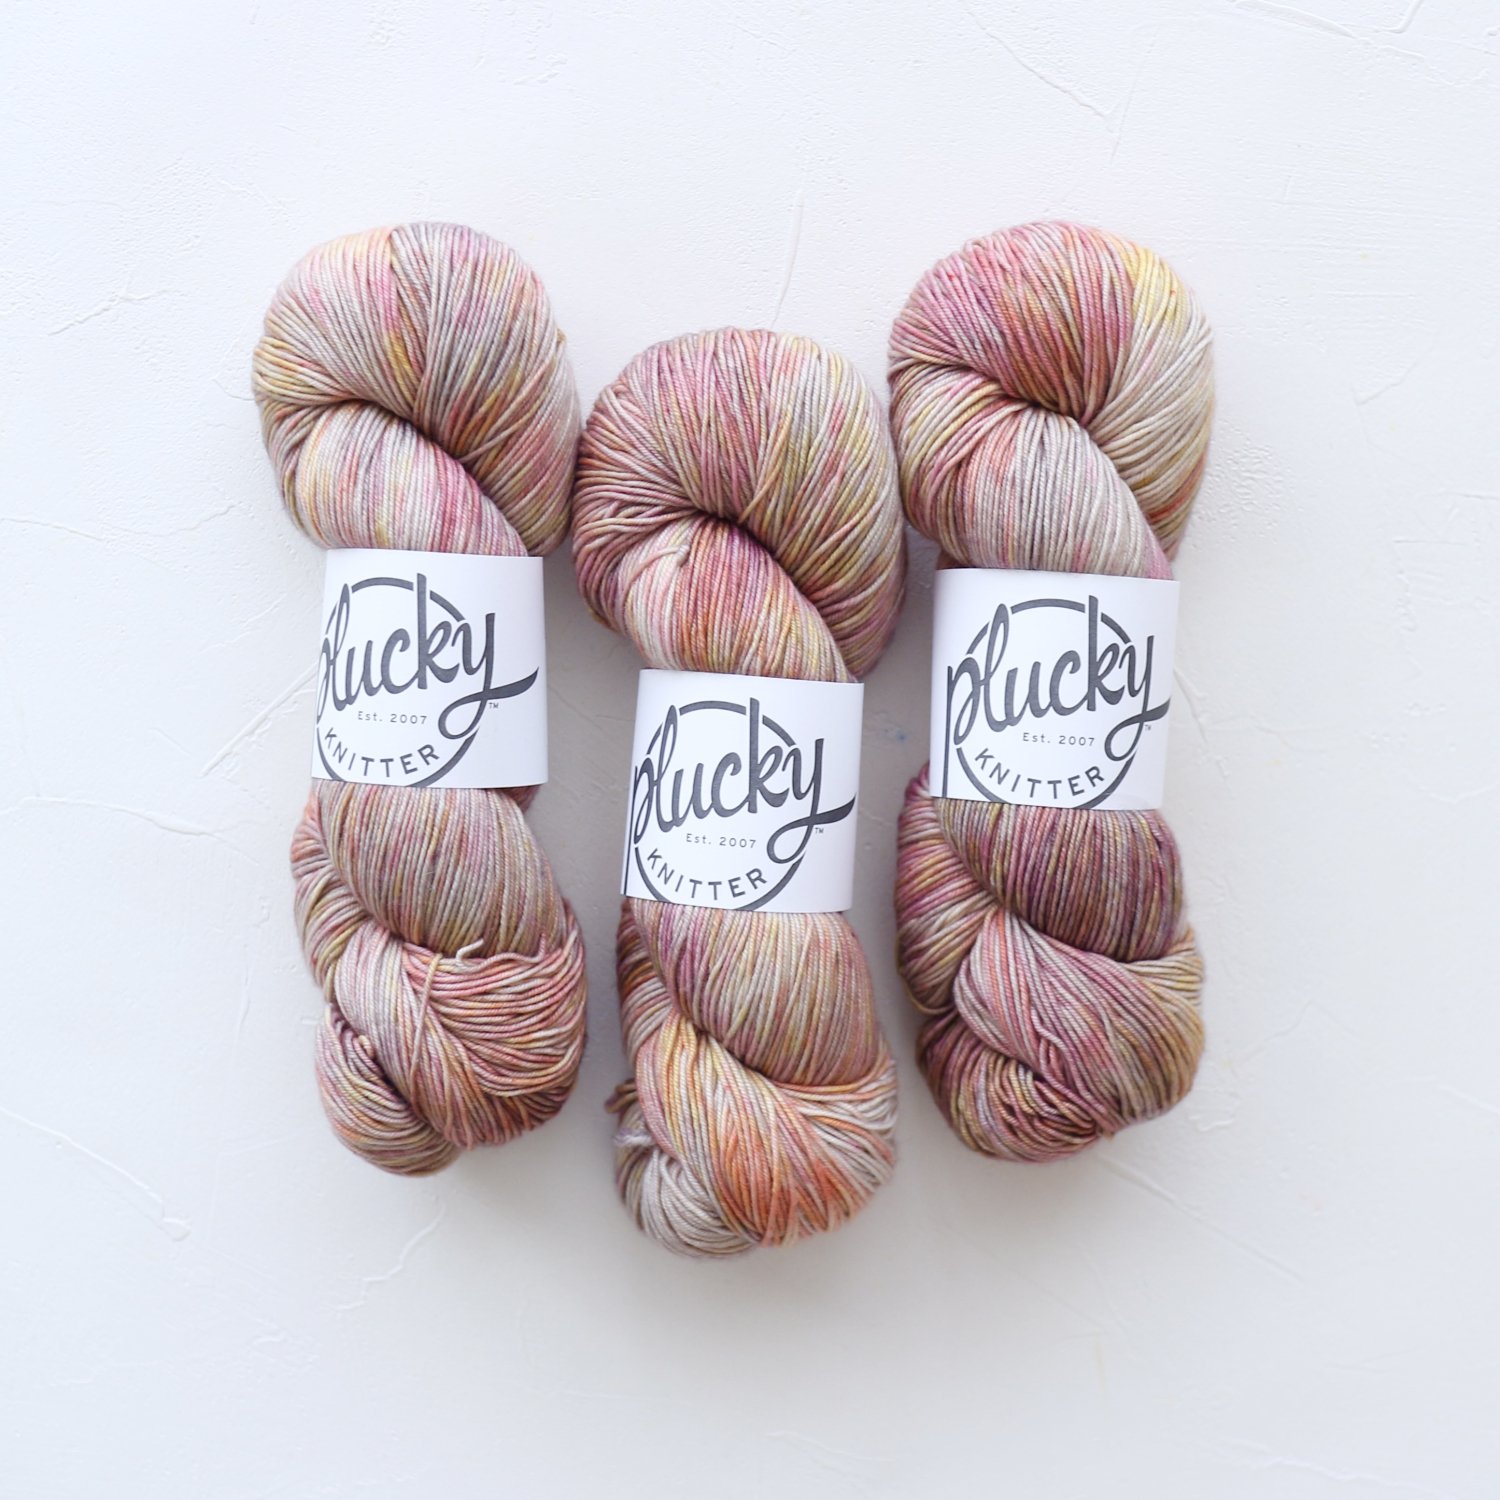 【Plucky Knitter】<br>Primo Fingering<br>Small Batch No. 003